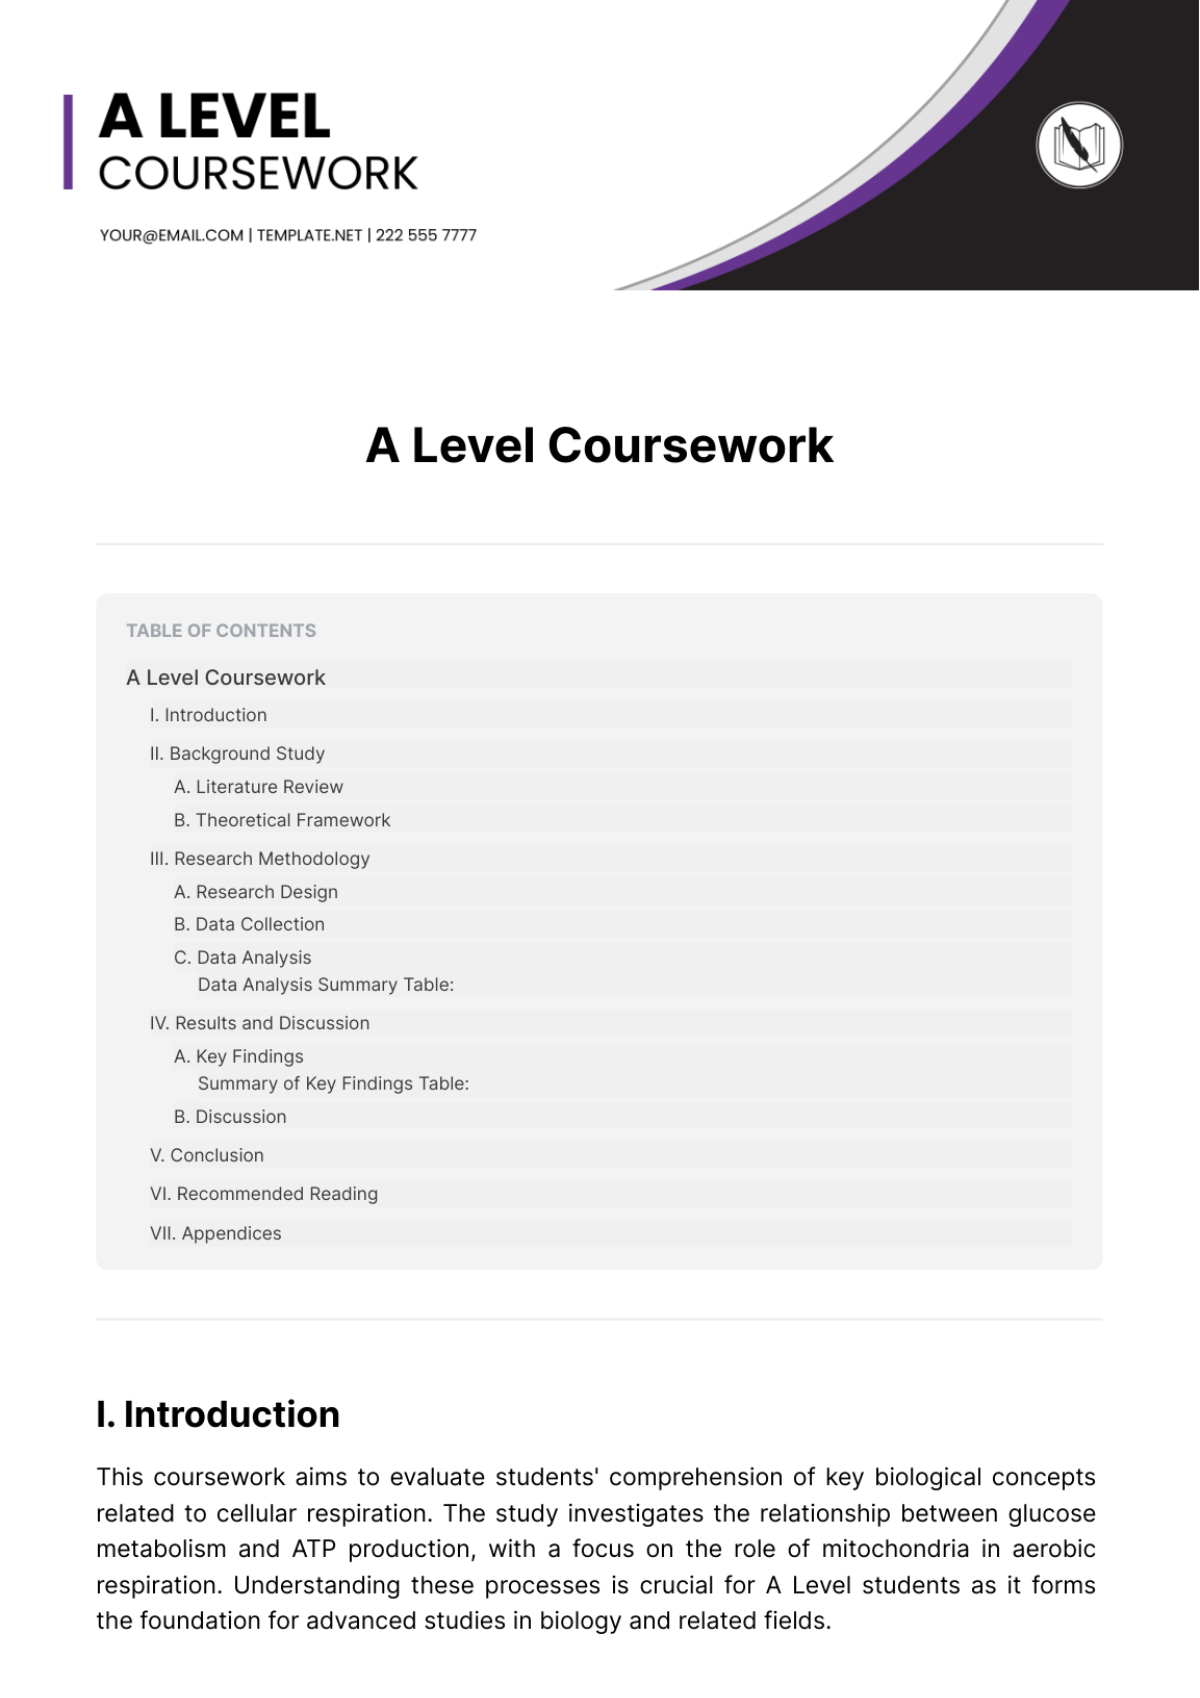 A Level Coursework Template